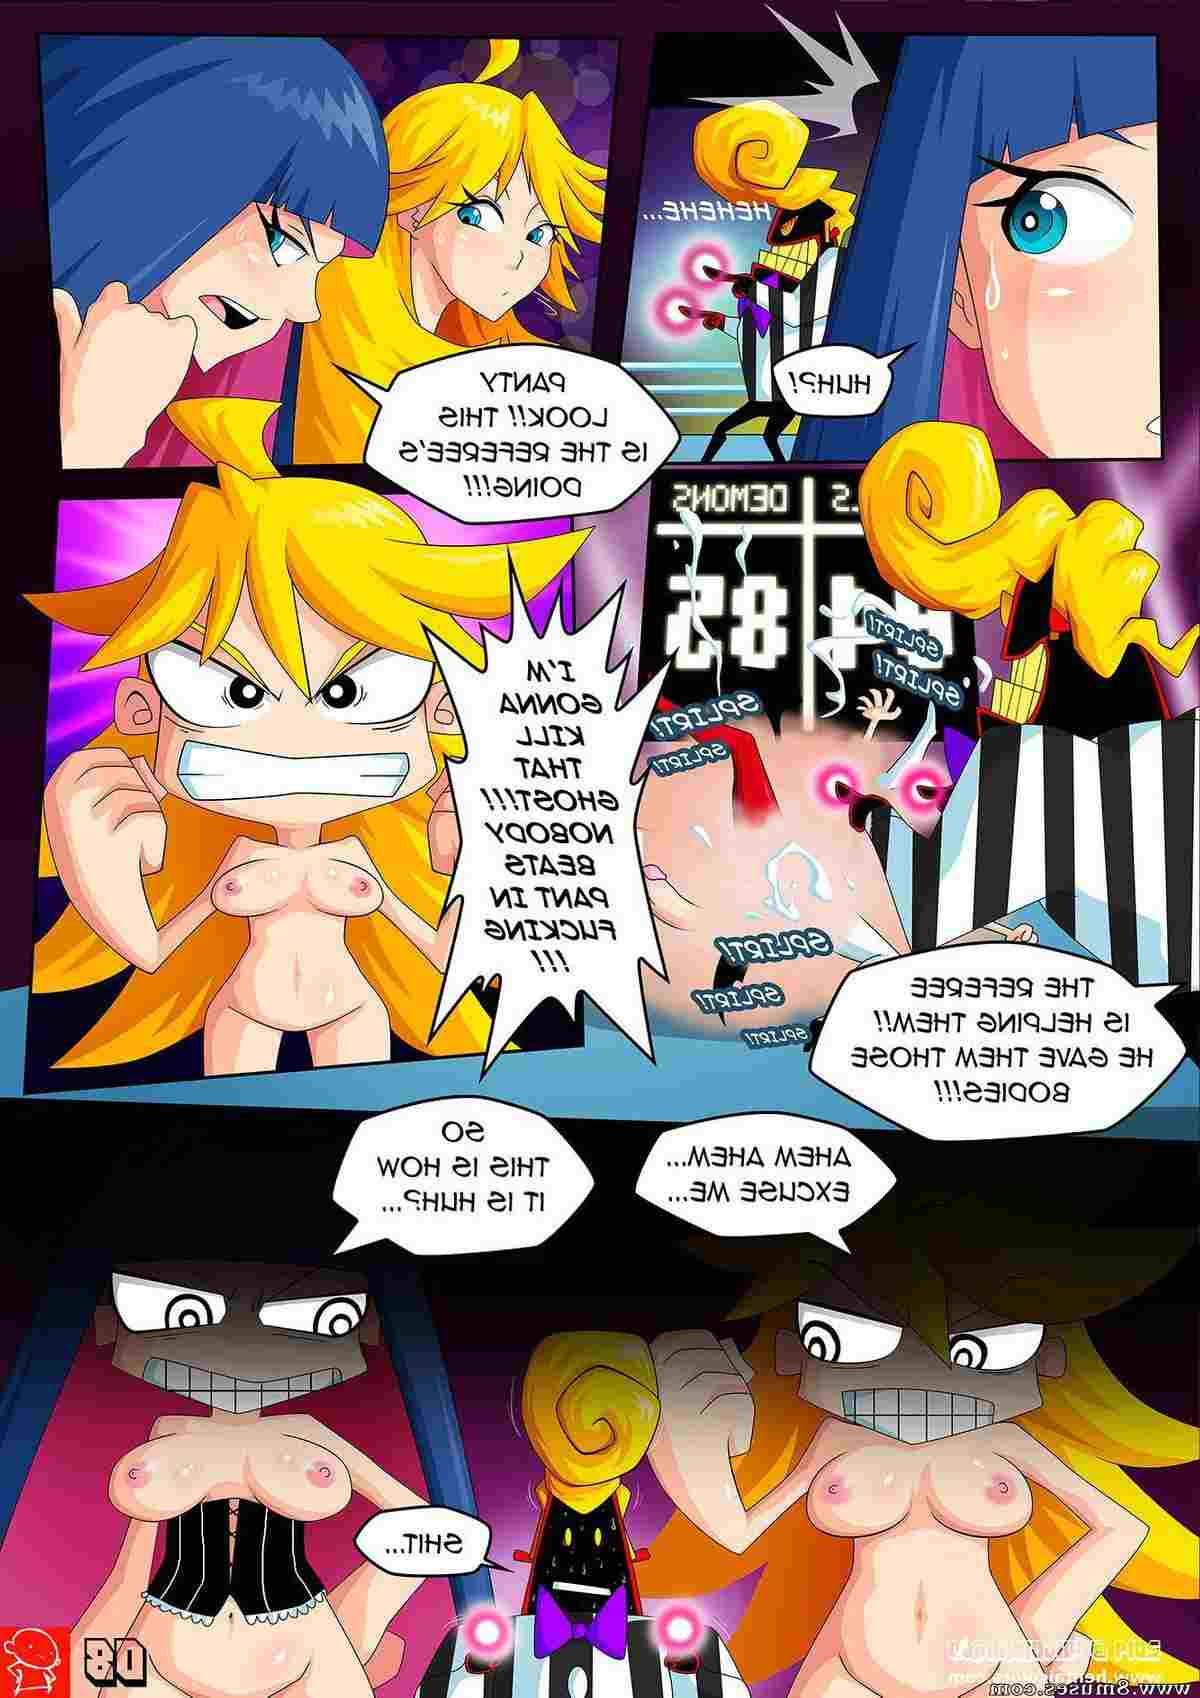 Witchking00-Comics/Panty-and-Stocking-Angels-vs-Demons Panty_and_Stocking_Angels_vs_Demons__8muses_-_Sex_and_Porn_Comics_9.jpg